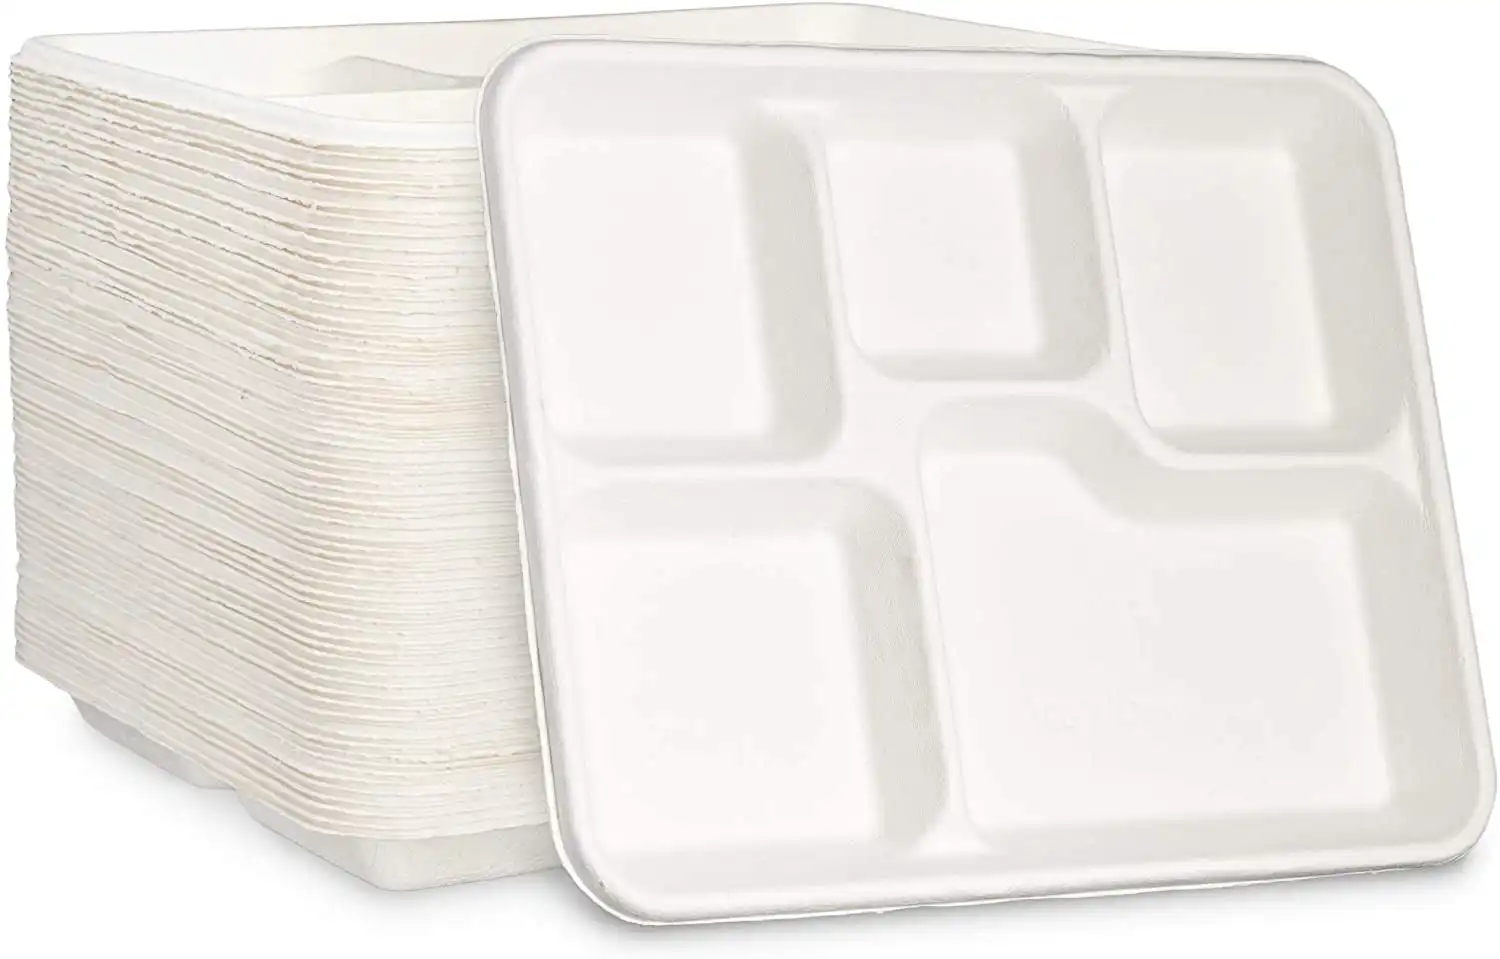 125 Pack | Disposable 100% Compostable 5 Compartment Plates Eco-Friendly